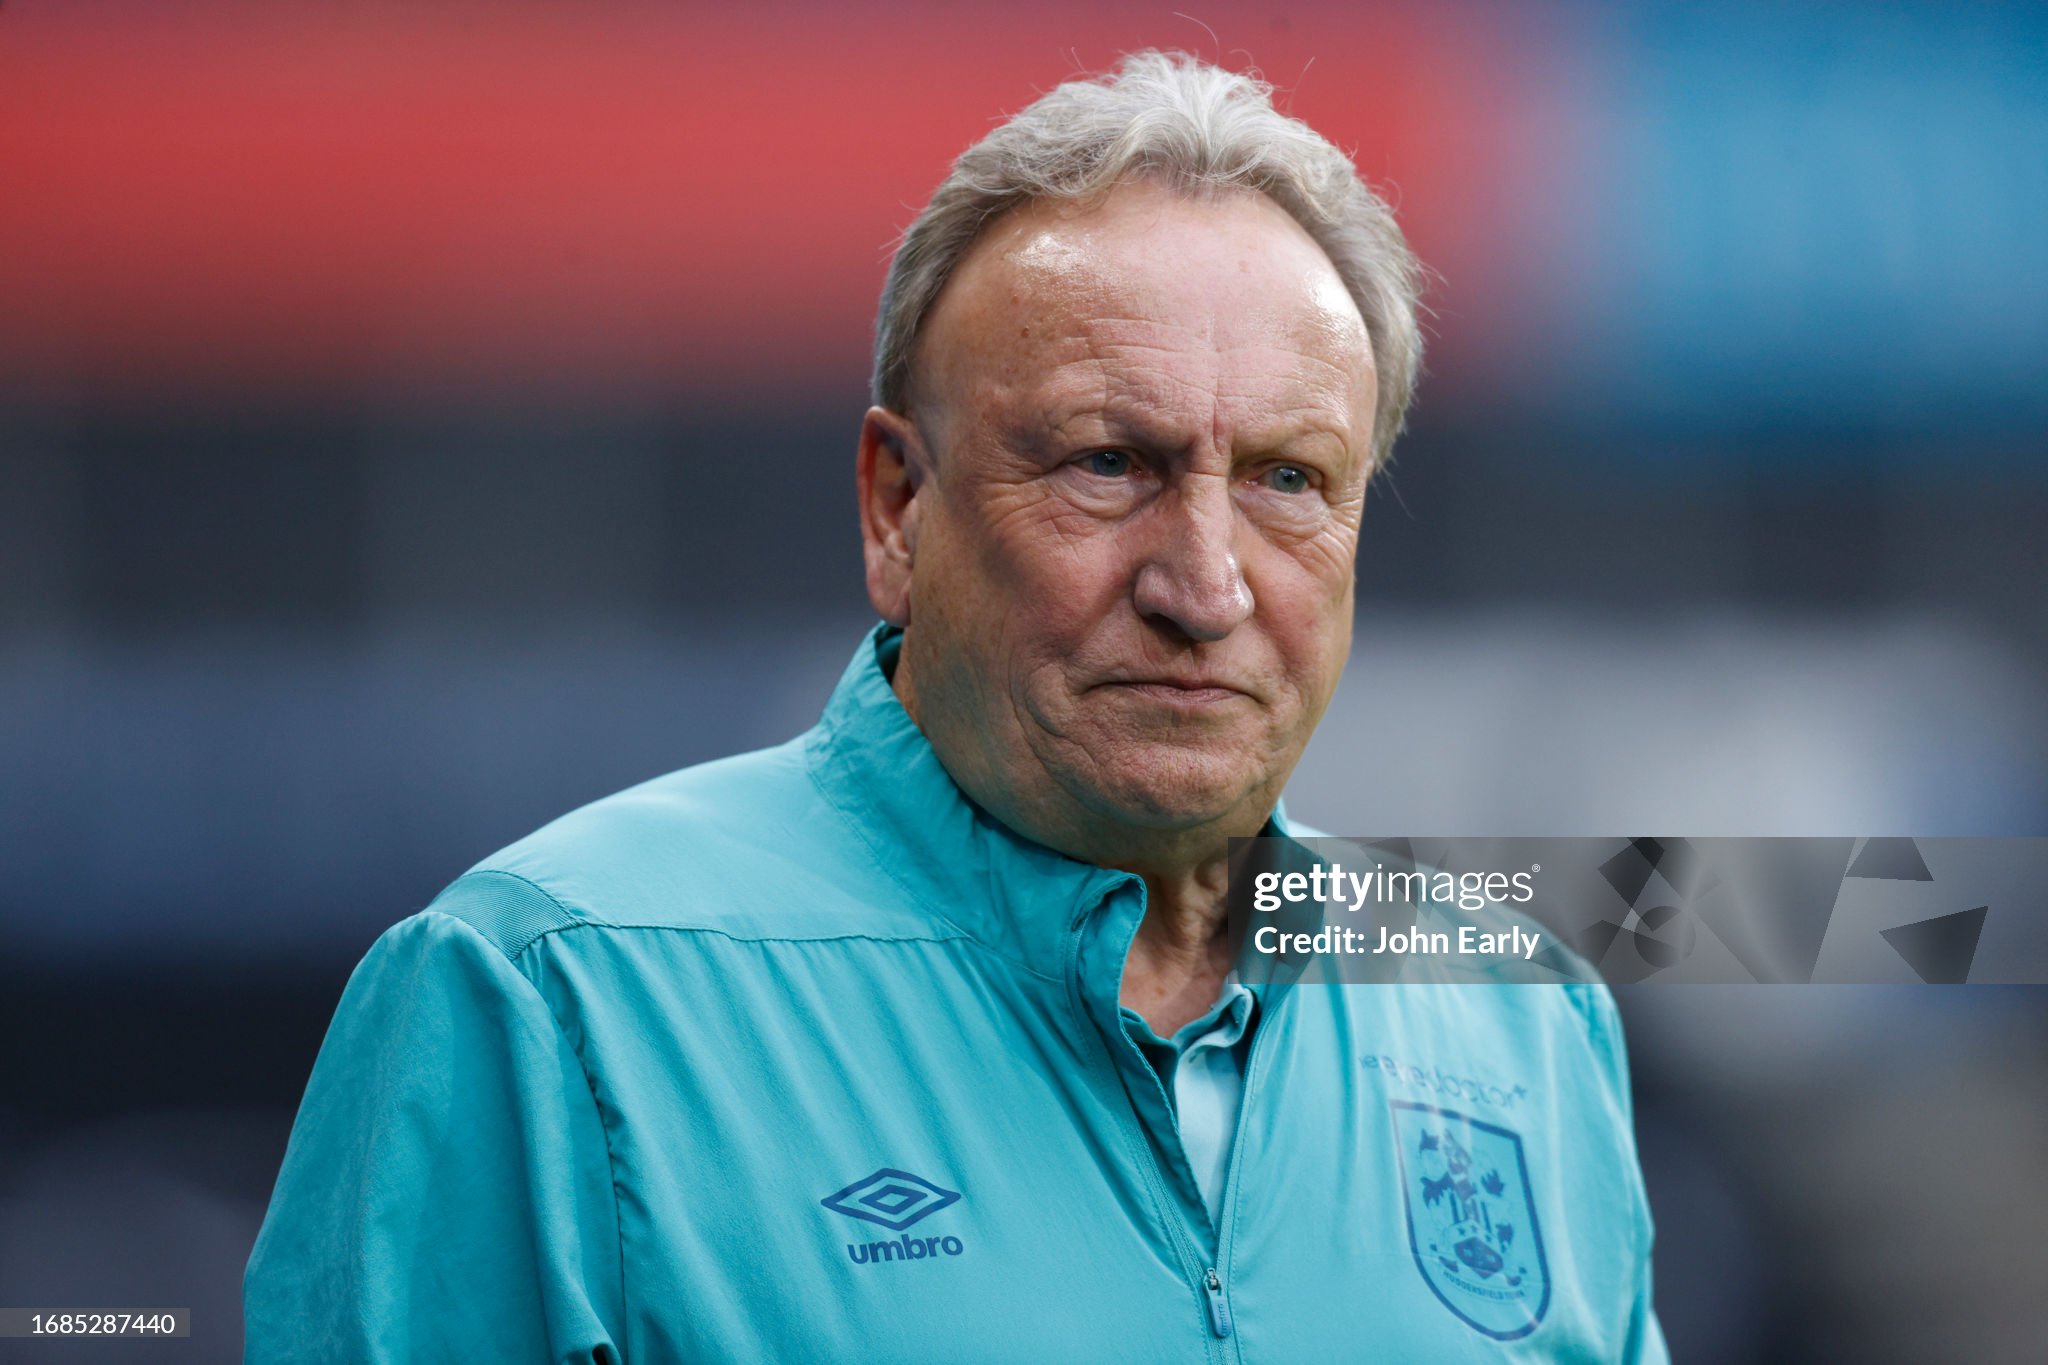 Warnock has to make way for a new manager: 'I'm retiring again'